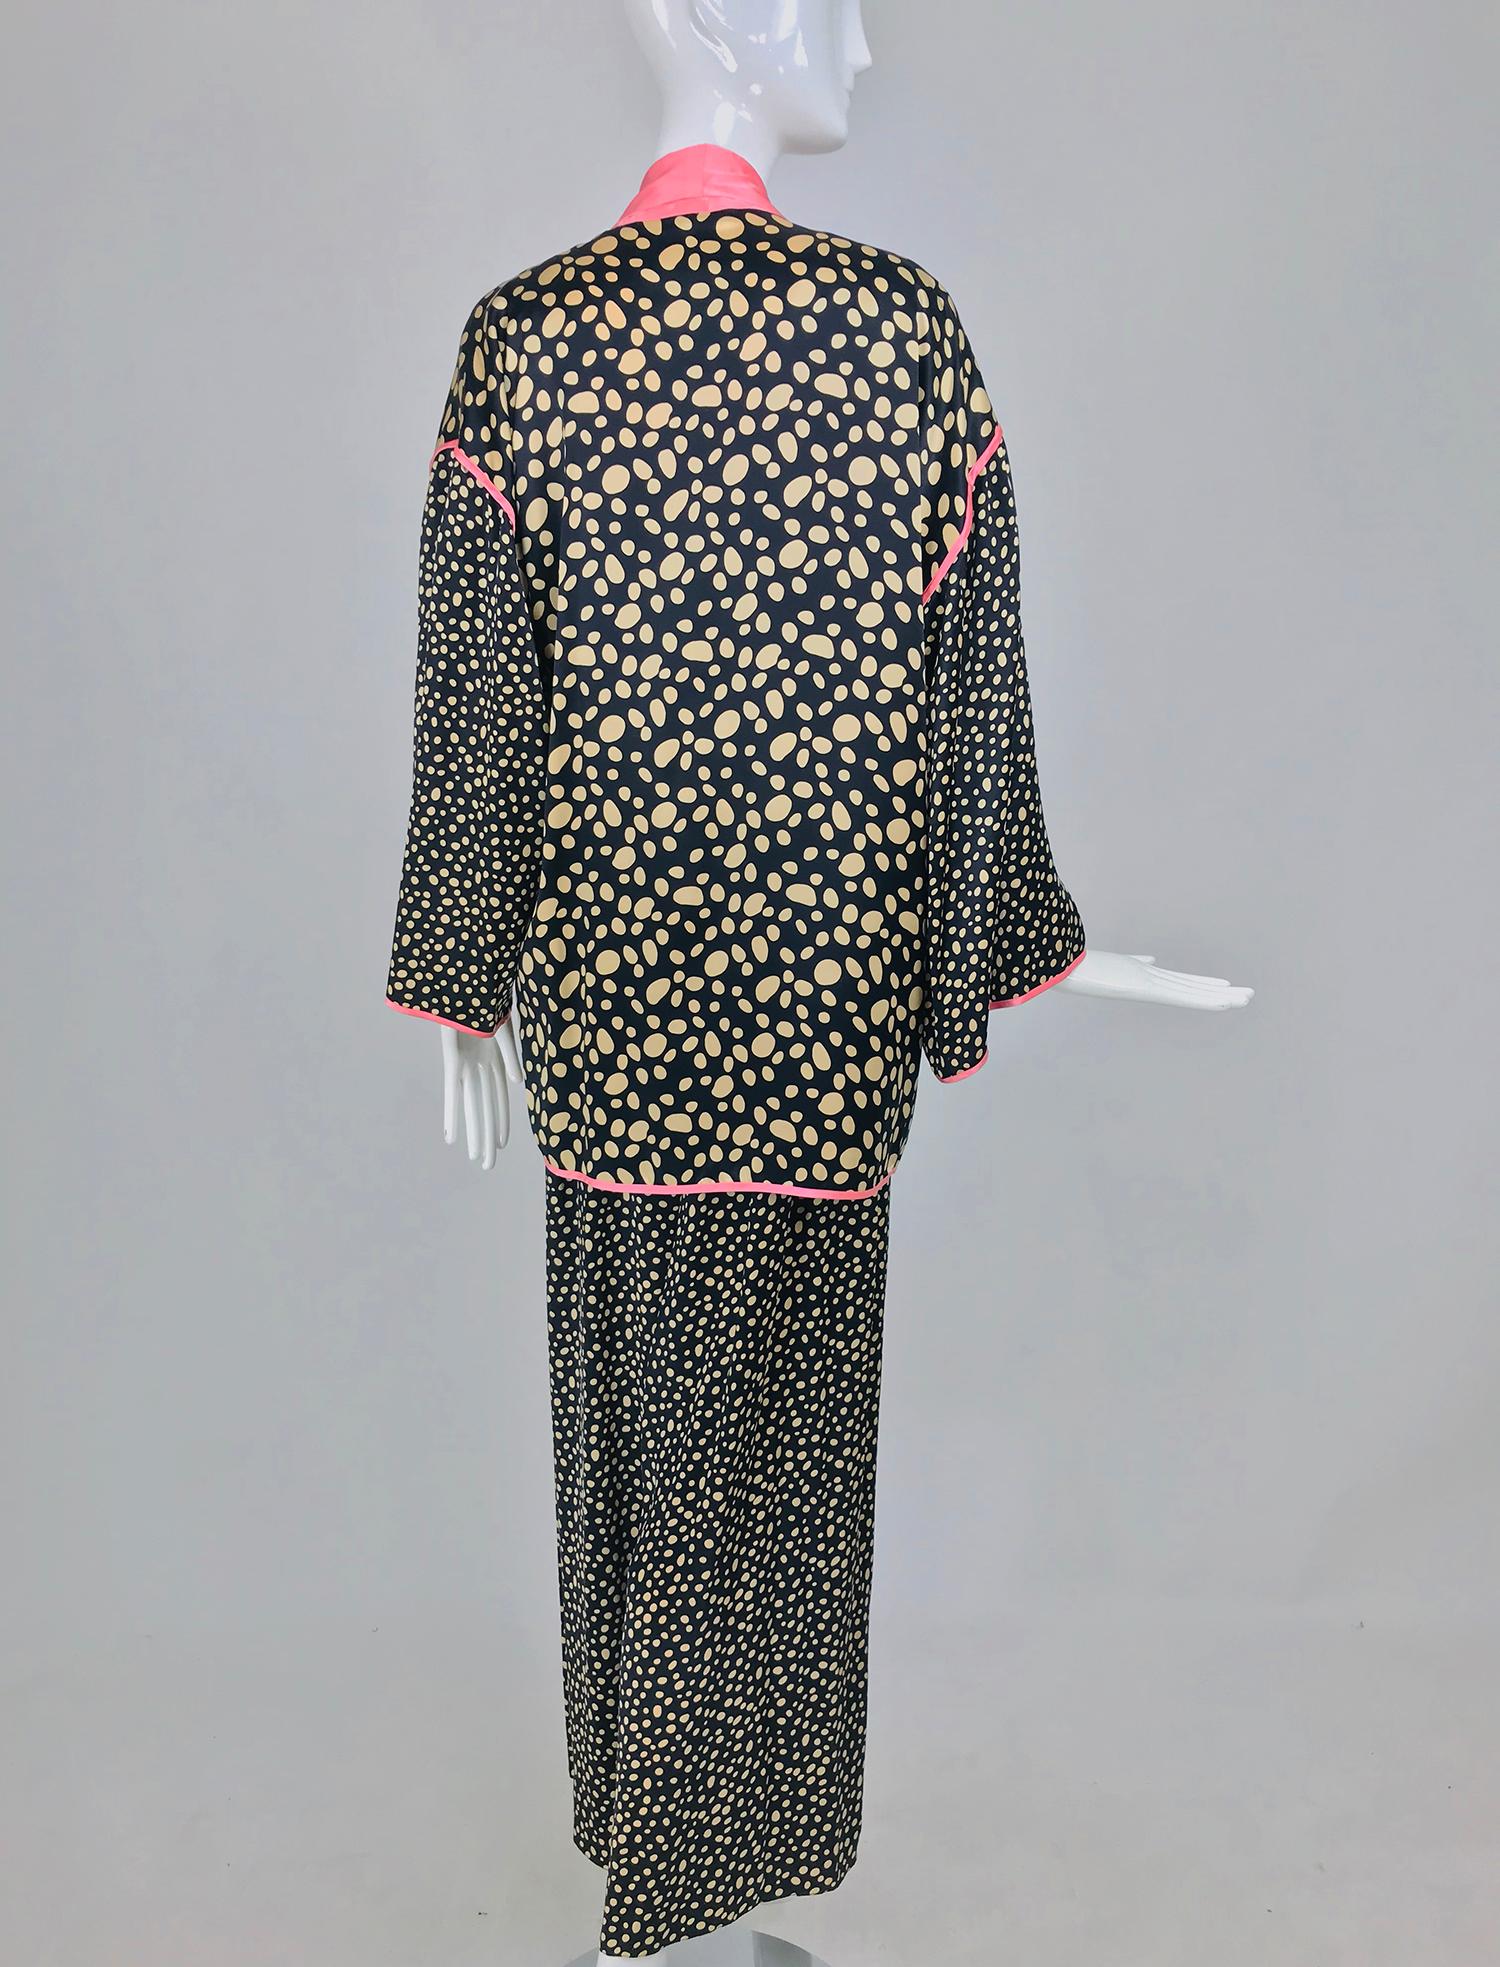 Guy Laroche Silk Evening Pajama set in Cream and Black Dots with Pink Trim from the 1990s. This amazing set is perfect for anyone who likes the chic and exotic, perfect for at home or special evenings. This two piece set has a one piece jumpsuit